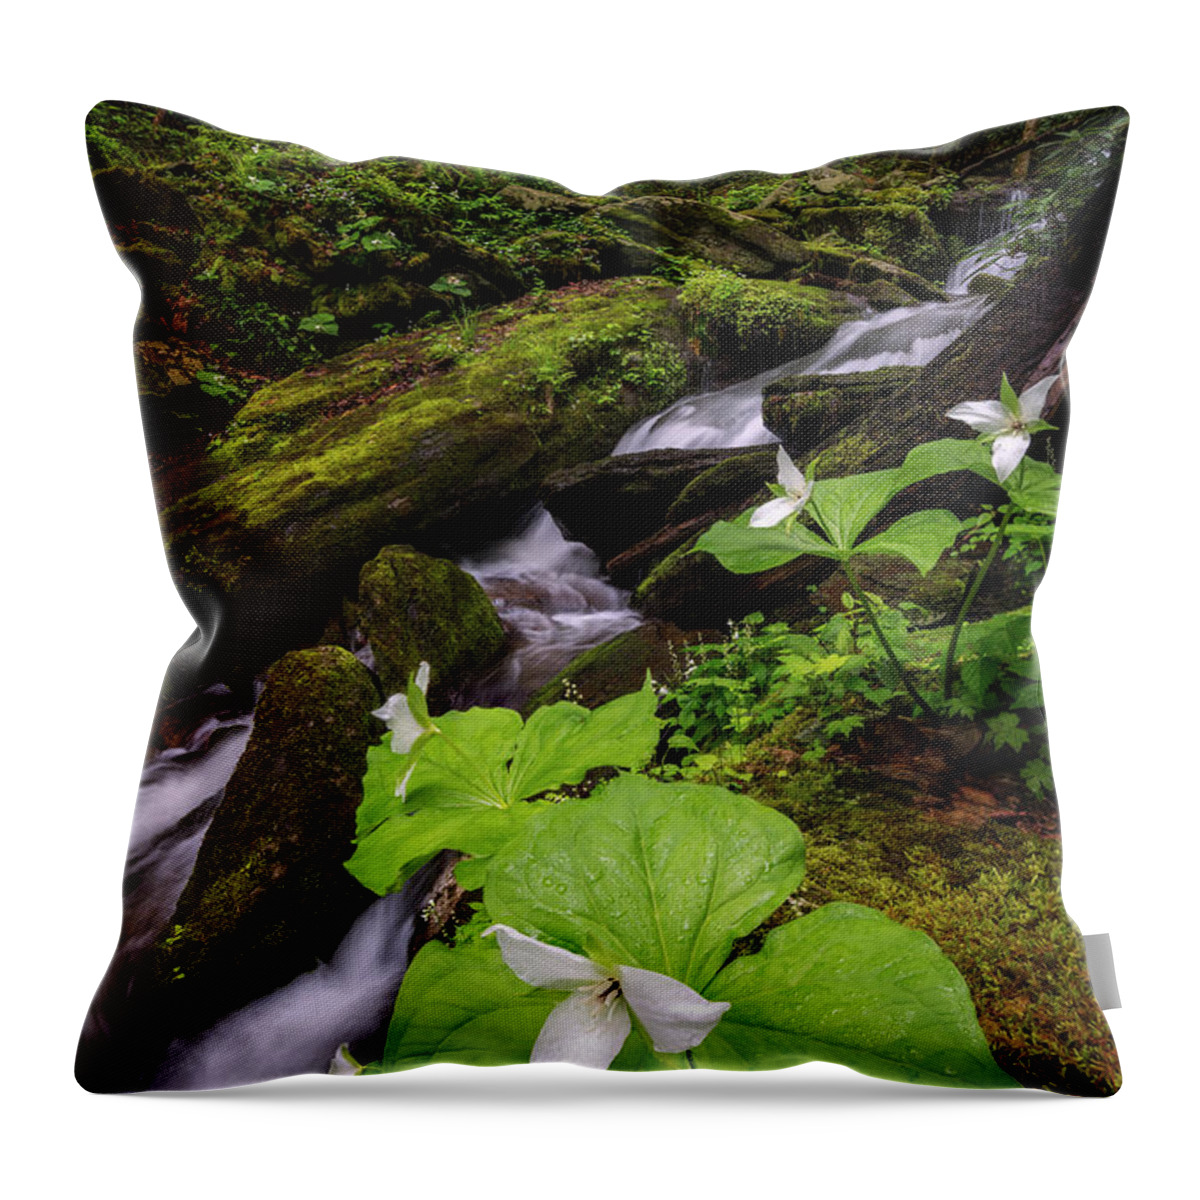 Trillium Throw Pillow featuring the photograph Stream Side Trillium by Anthony Heflin